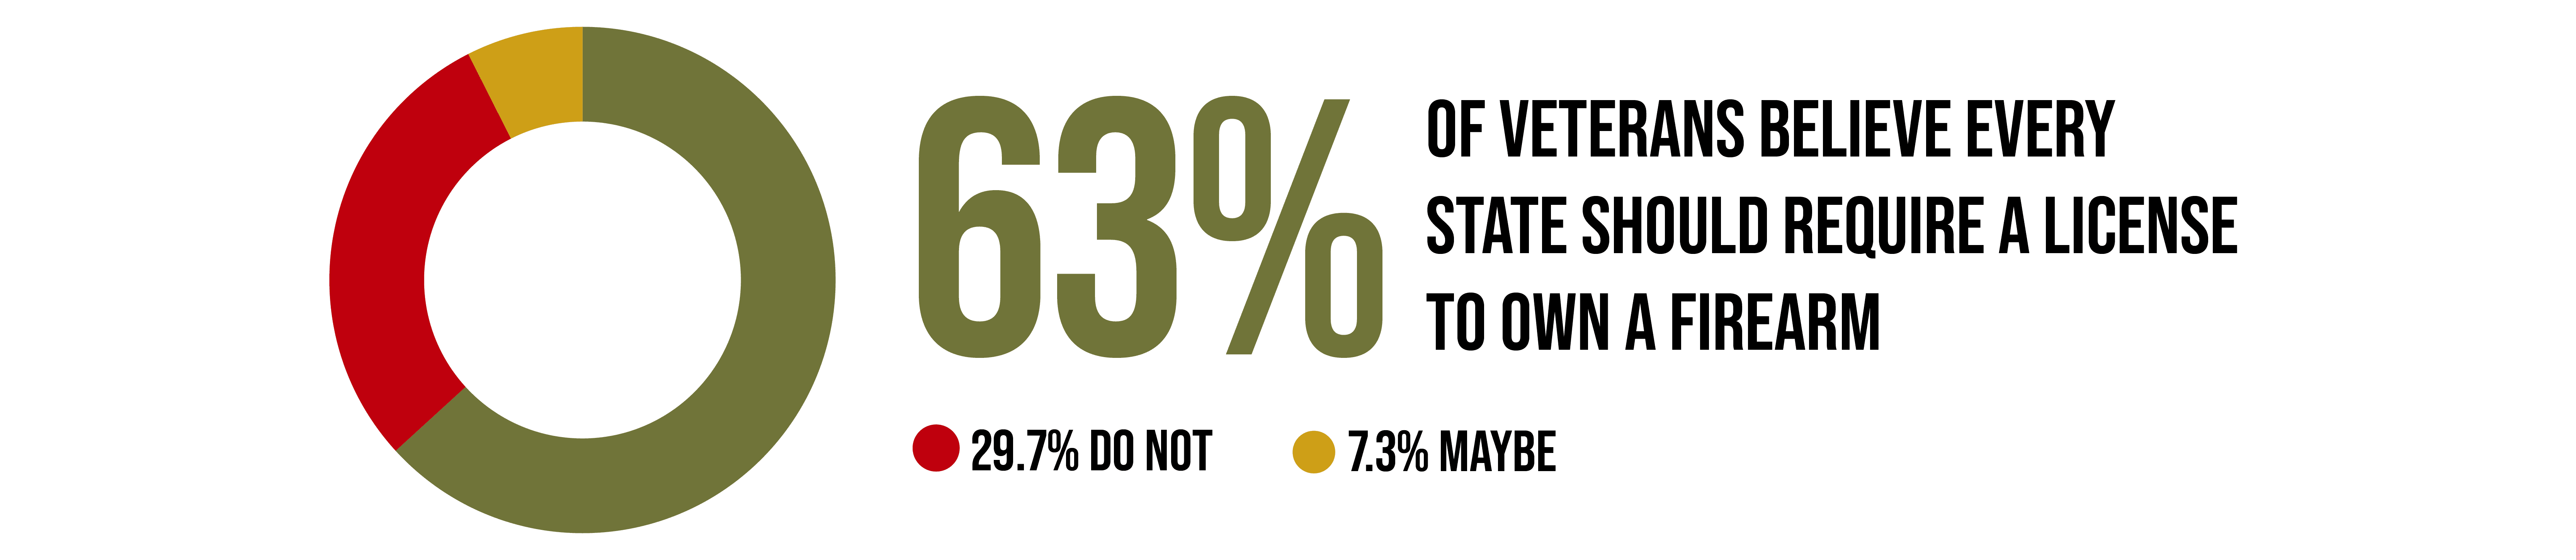 64% of Veterans Support Raising the Legal Age to Purchase a Gun to 21